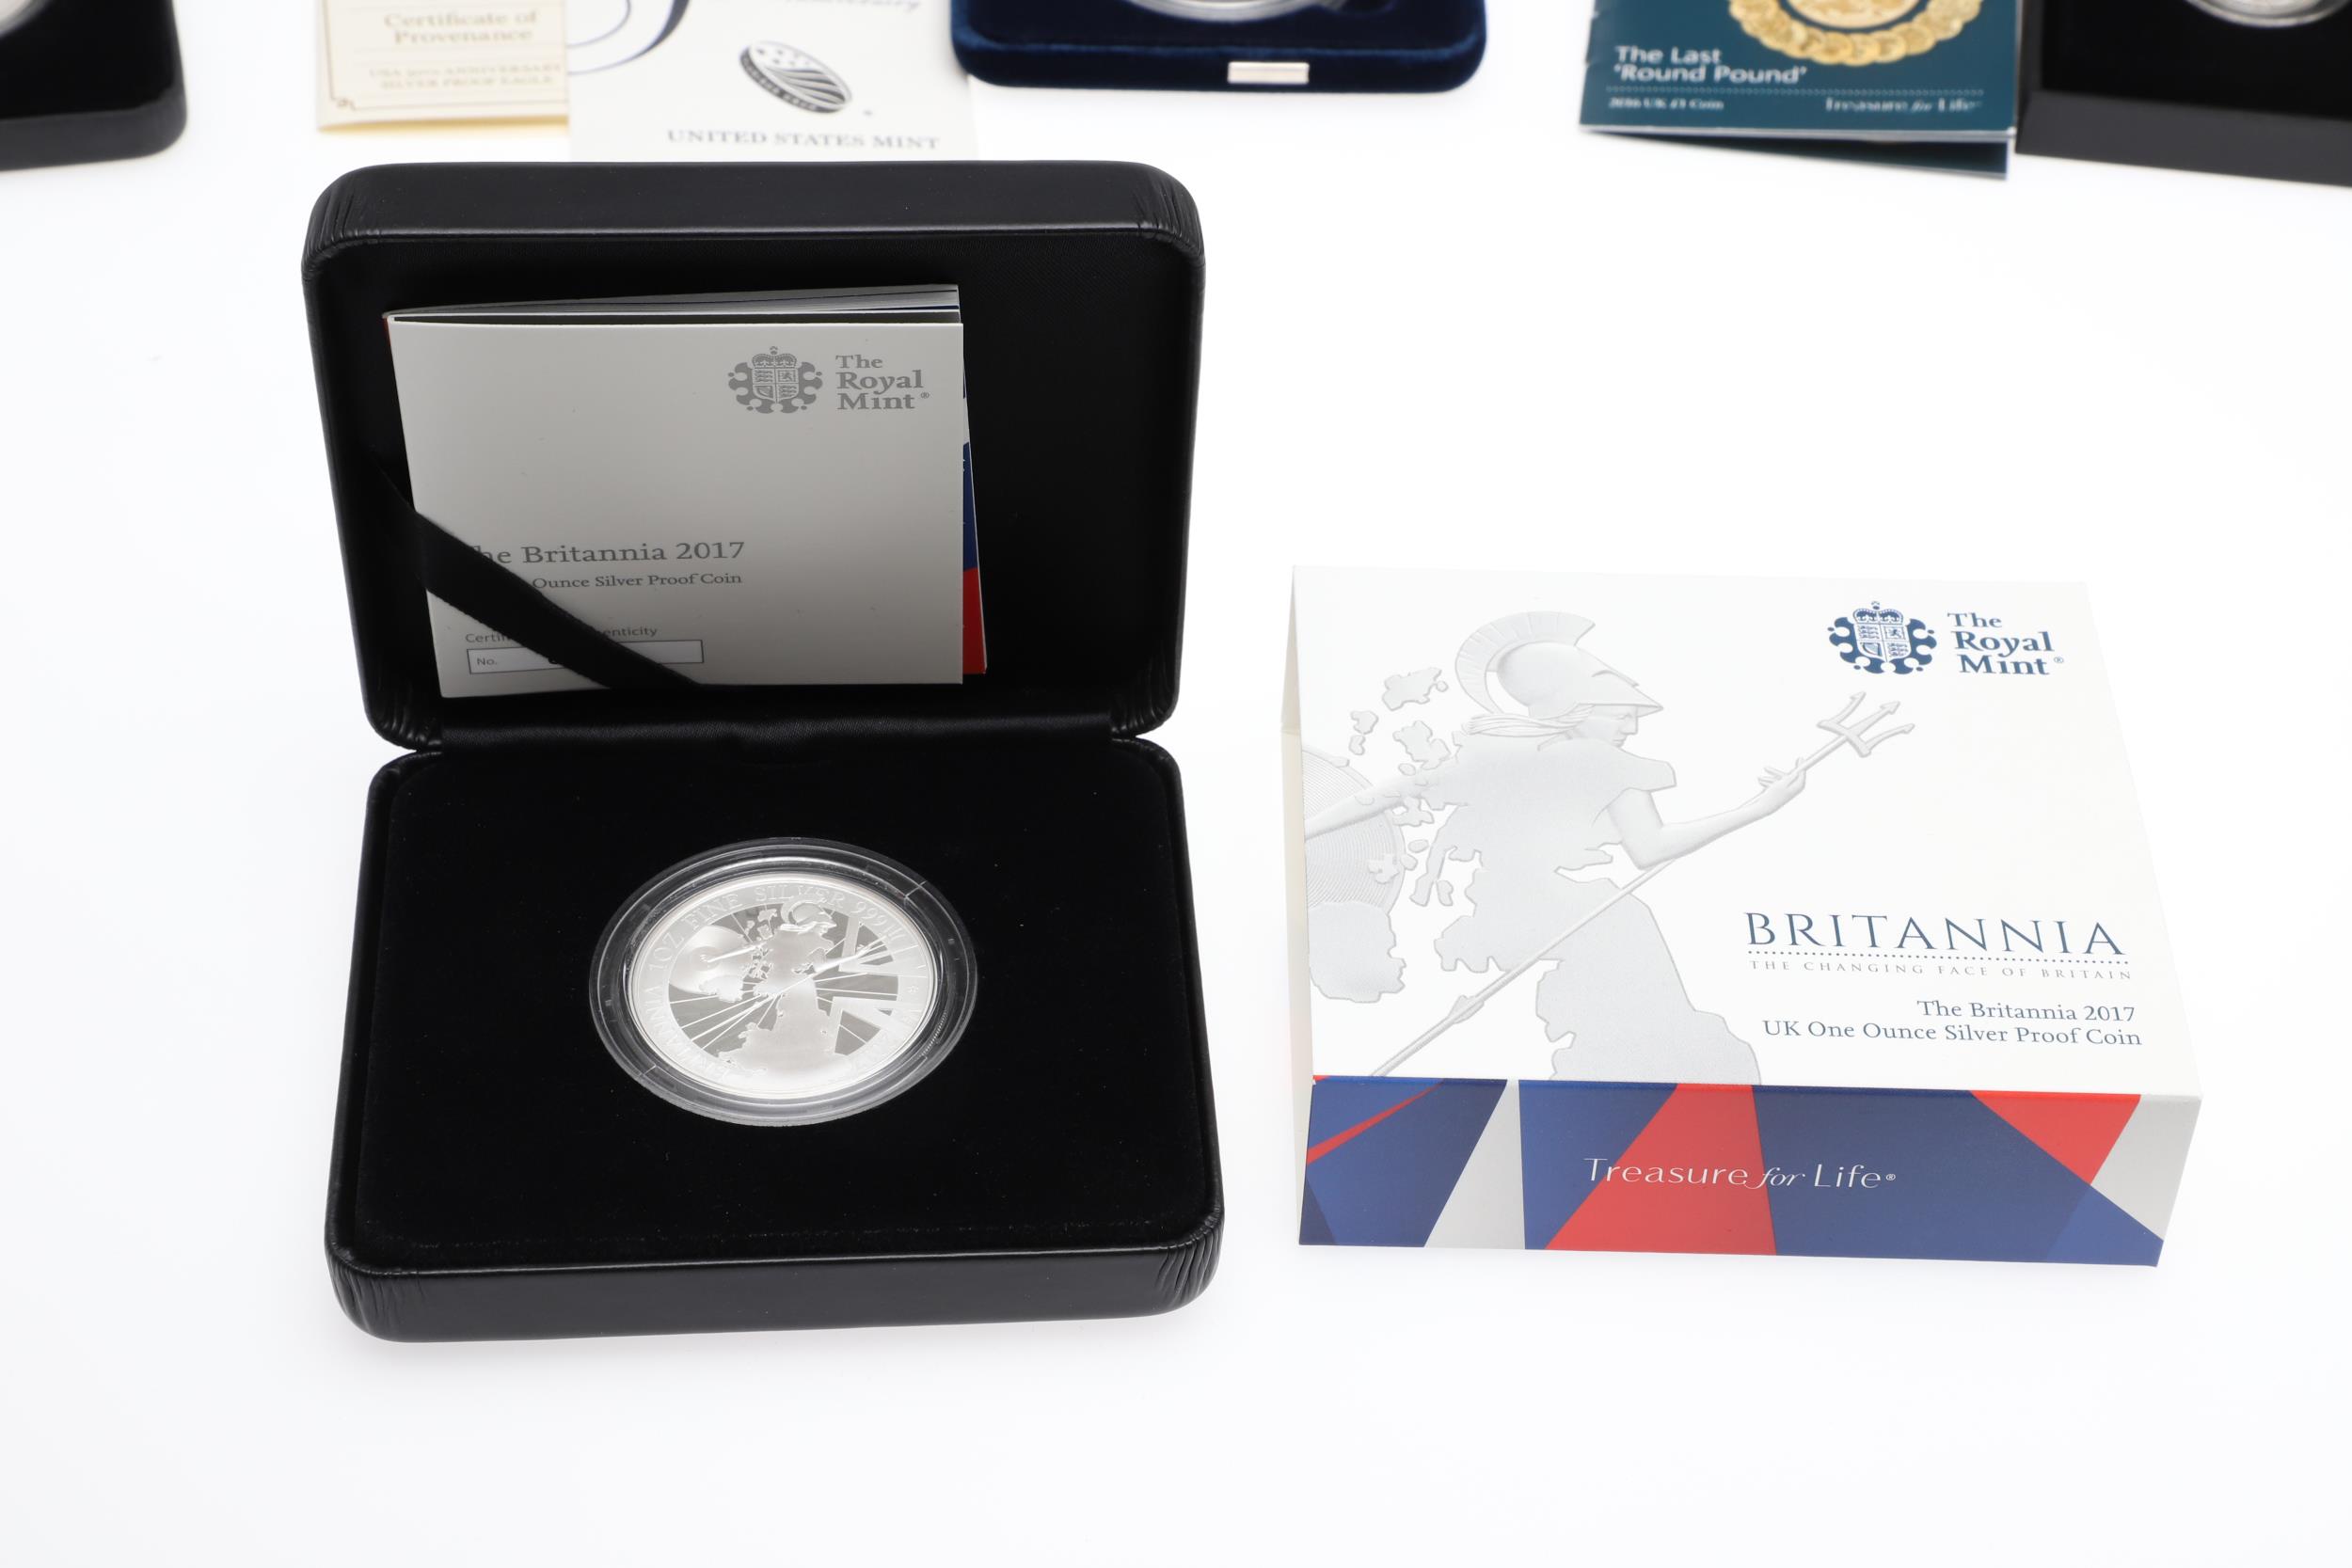 TWO ROYAL MINT ELIZABETH II BRITANNIA ISSUES AND OTHERS SIMILAR. 2016 - 2020. - Image 7 of 14